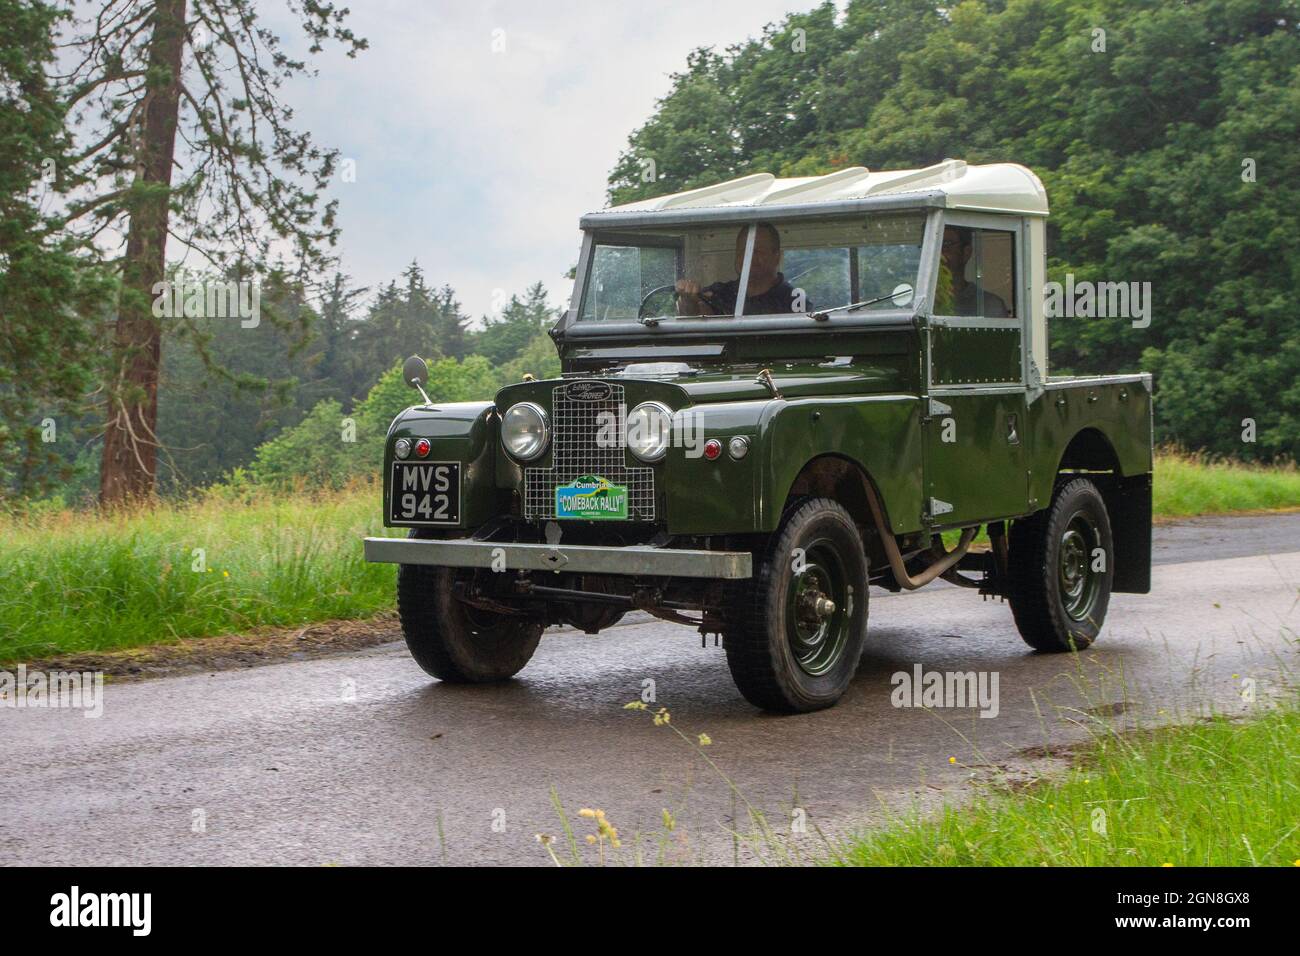 1957 50s green Land Rover en-route KLMC at ‘The Cars the Star Show” in Holker Hall & Gardens, Grange-over-Sands, UK Stock Photo